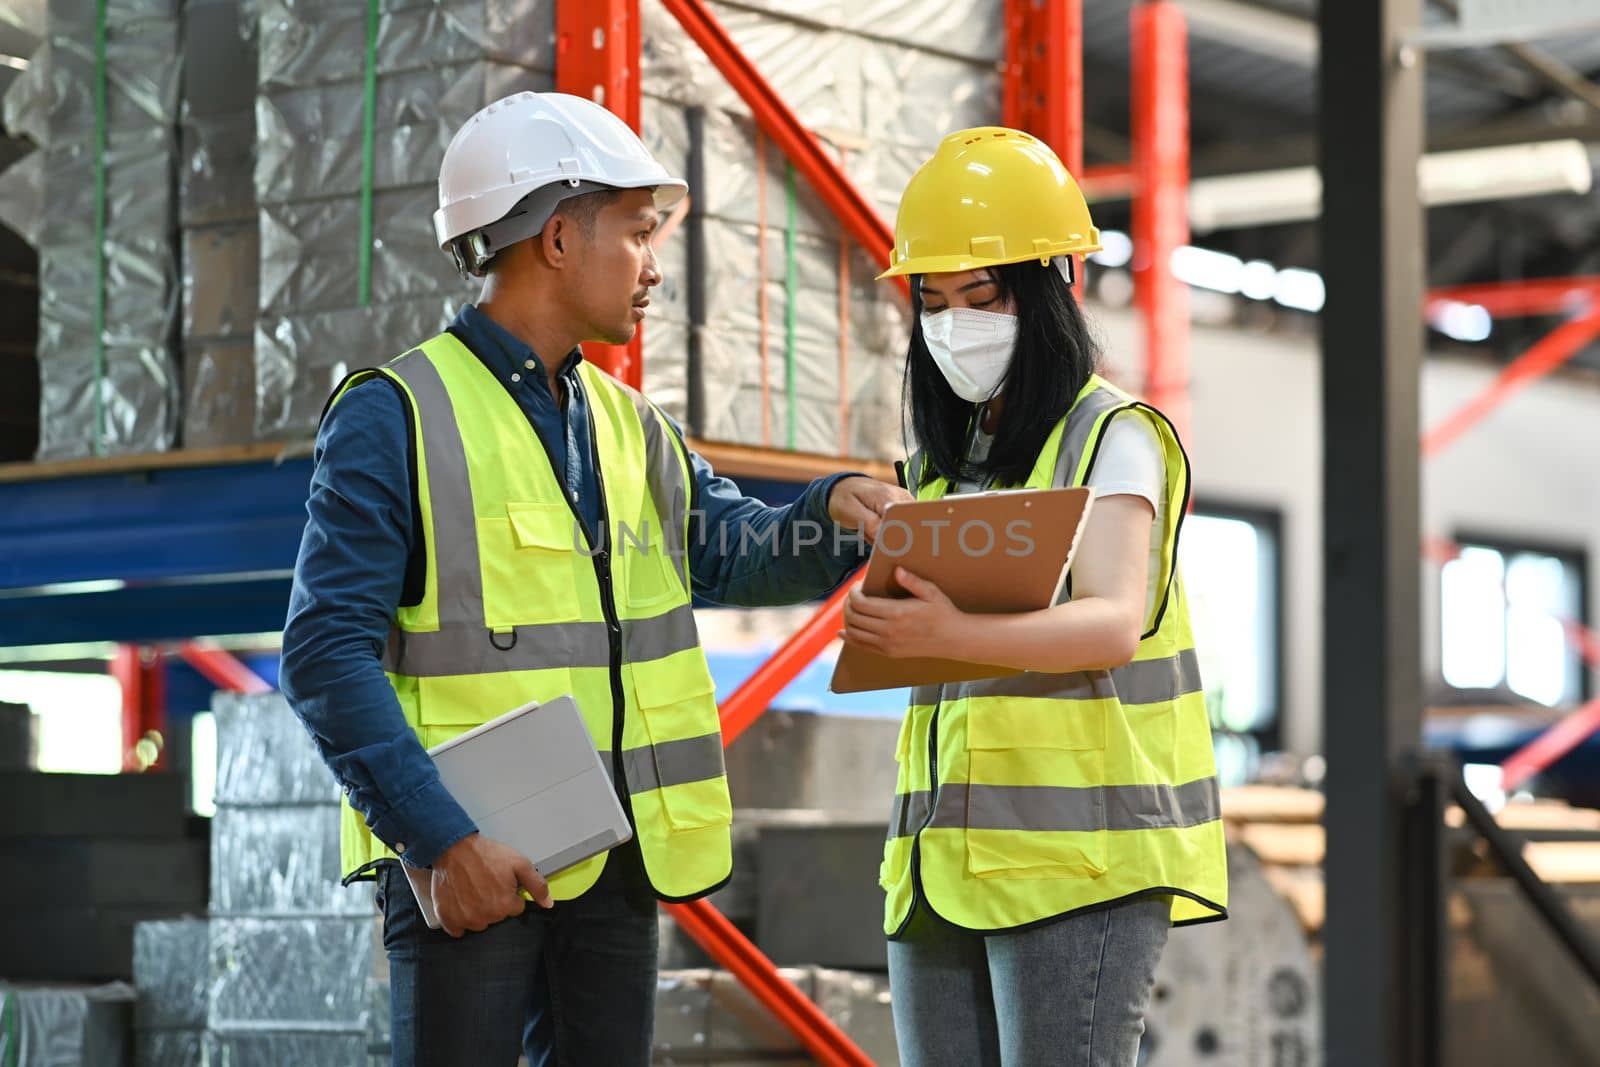 Warehouse workers are working in the retail warehouse full of shelves with goods. Manufacture storehouse occupation concept.